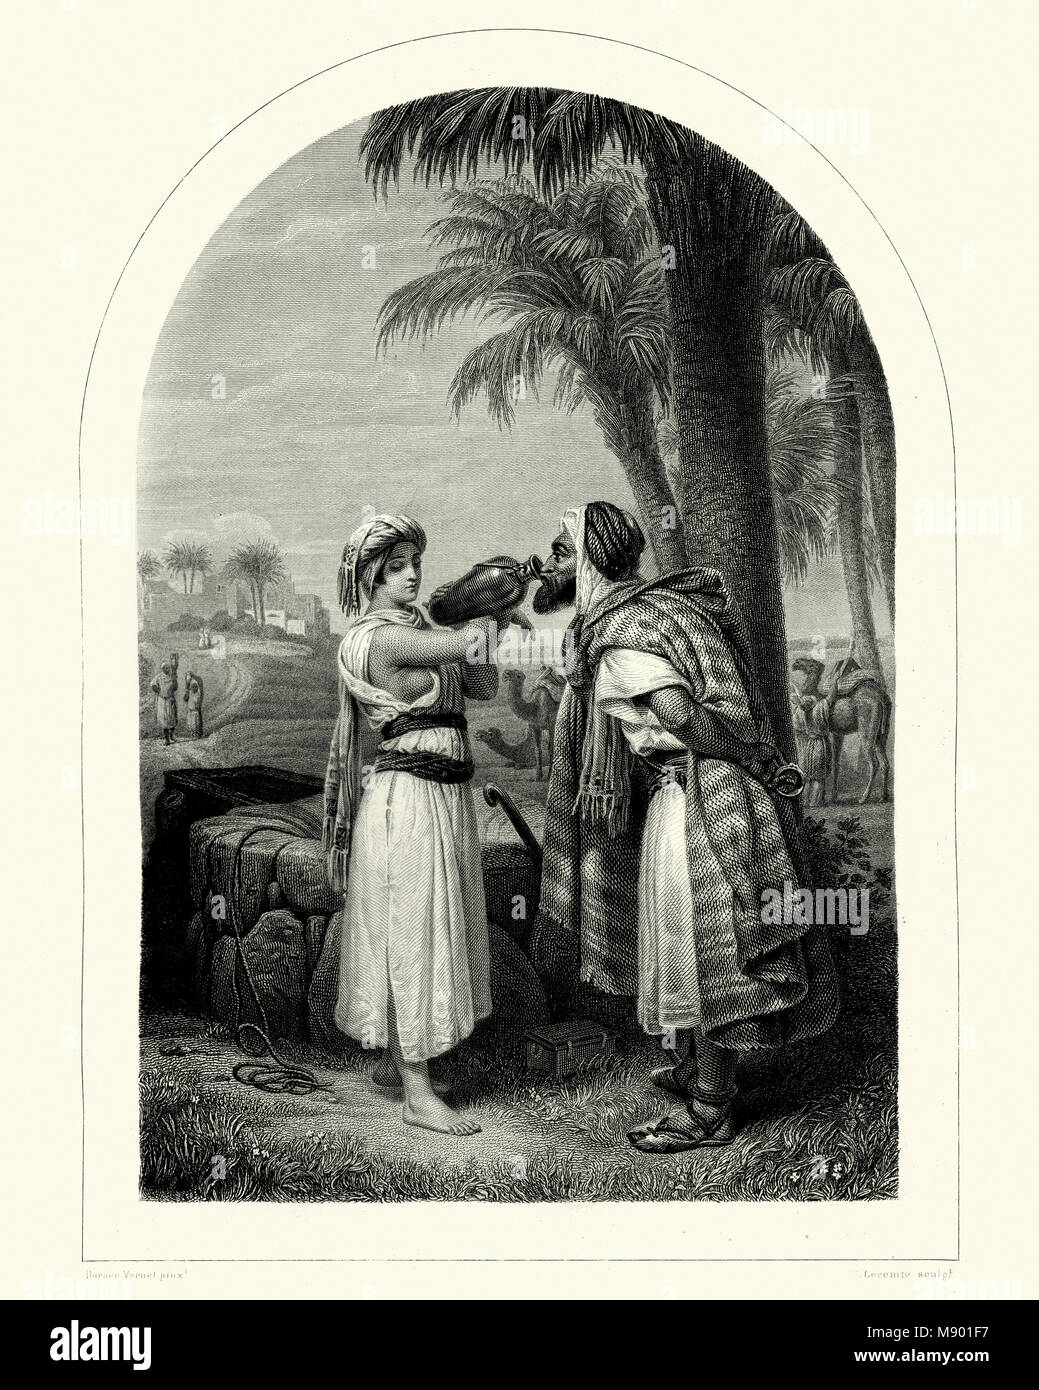 A scene from the Old Testament, Rebecca and Eliezer at the Well. Stock Photo